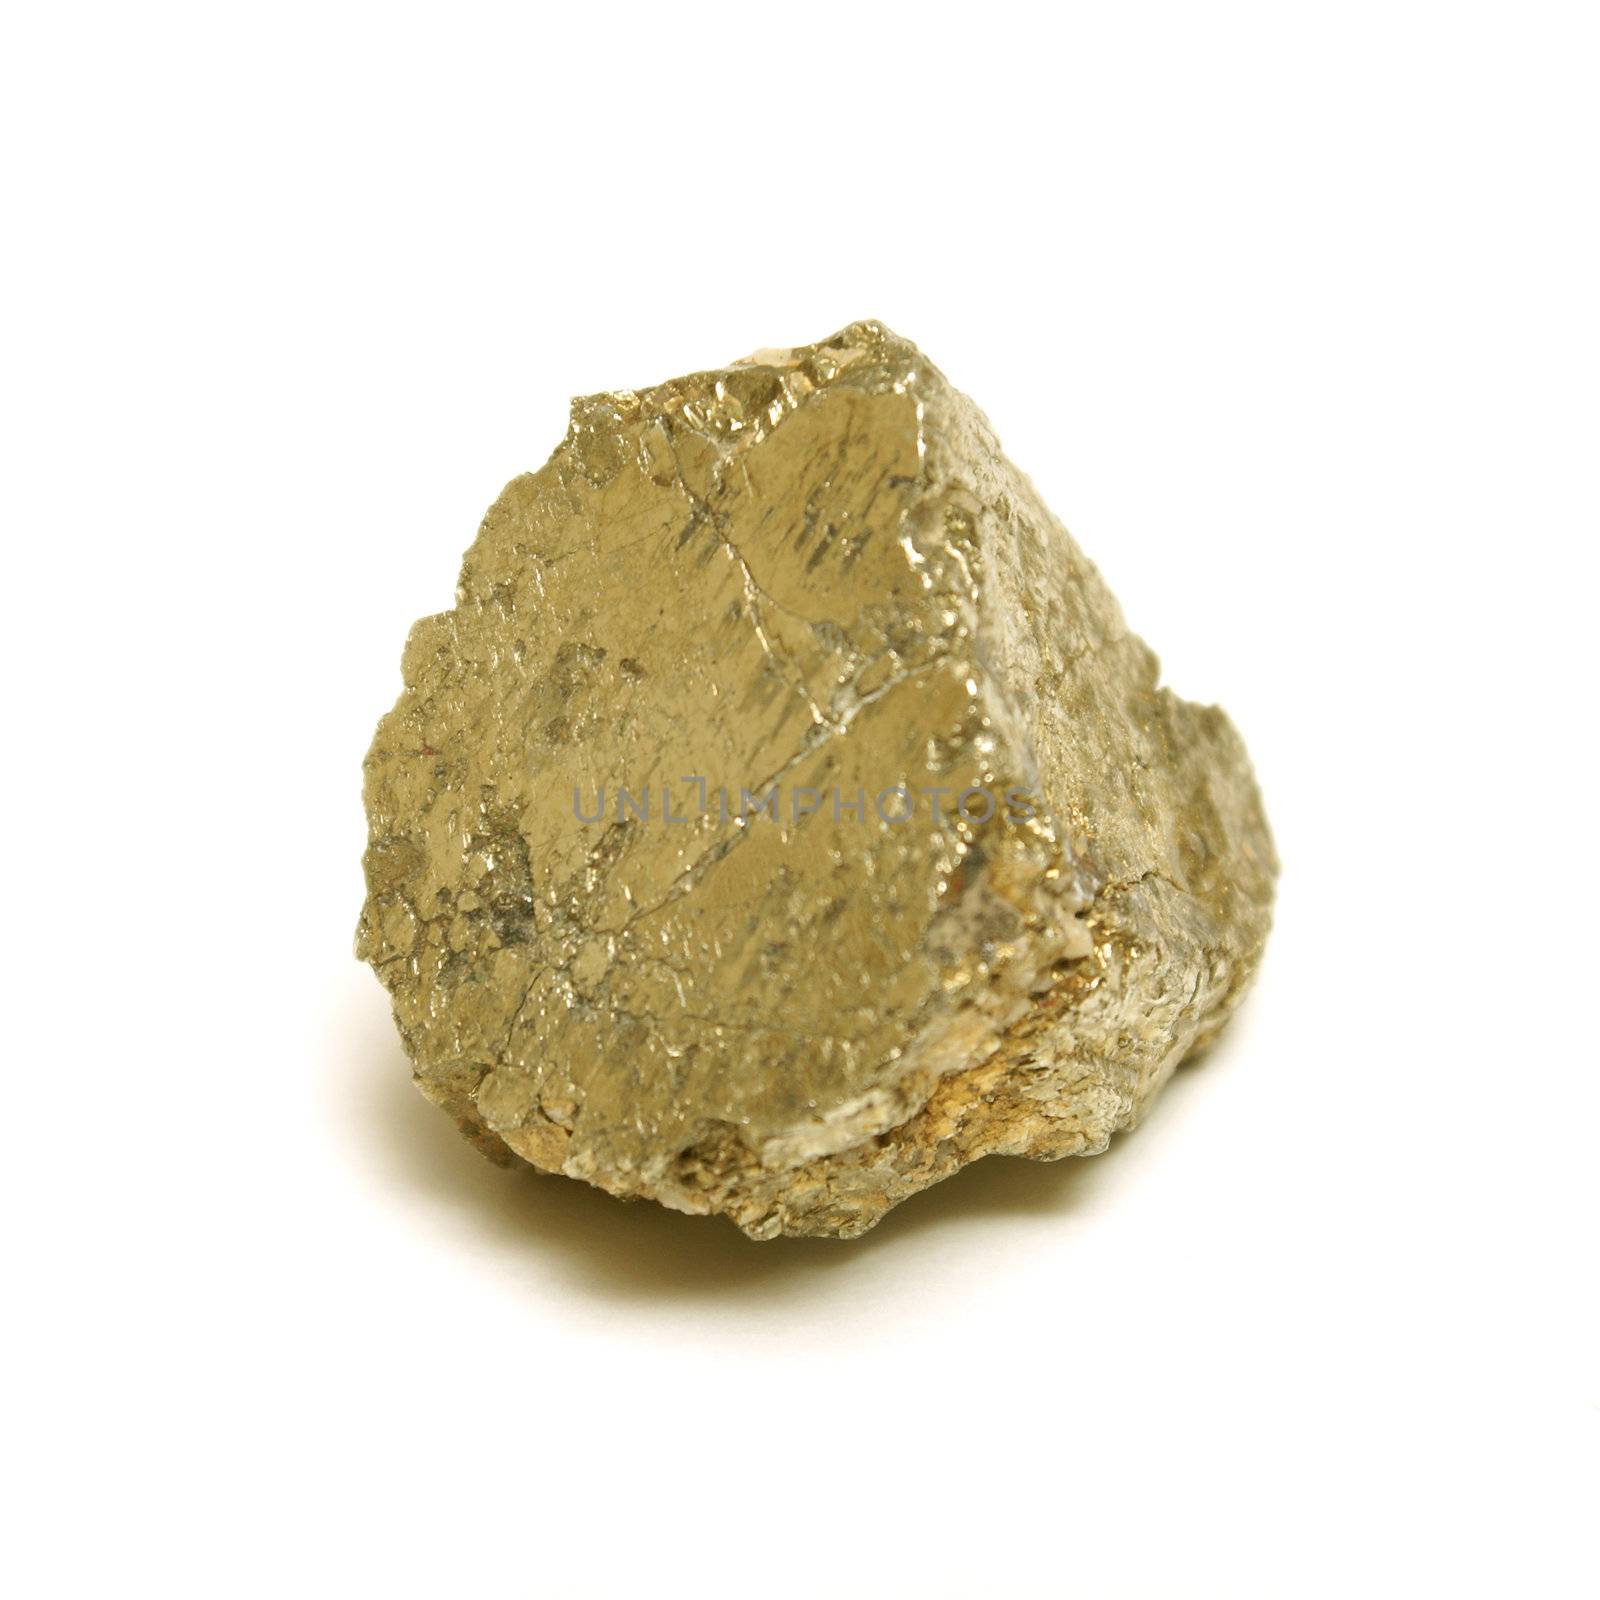 A macro shot of a nice size gold nugget.